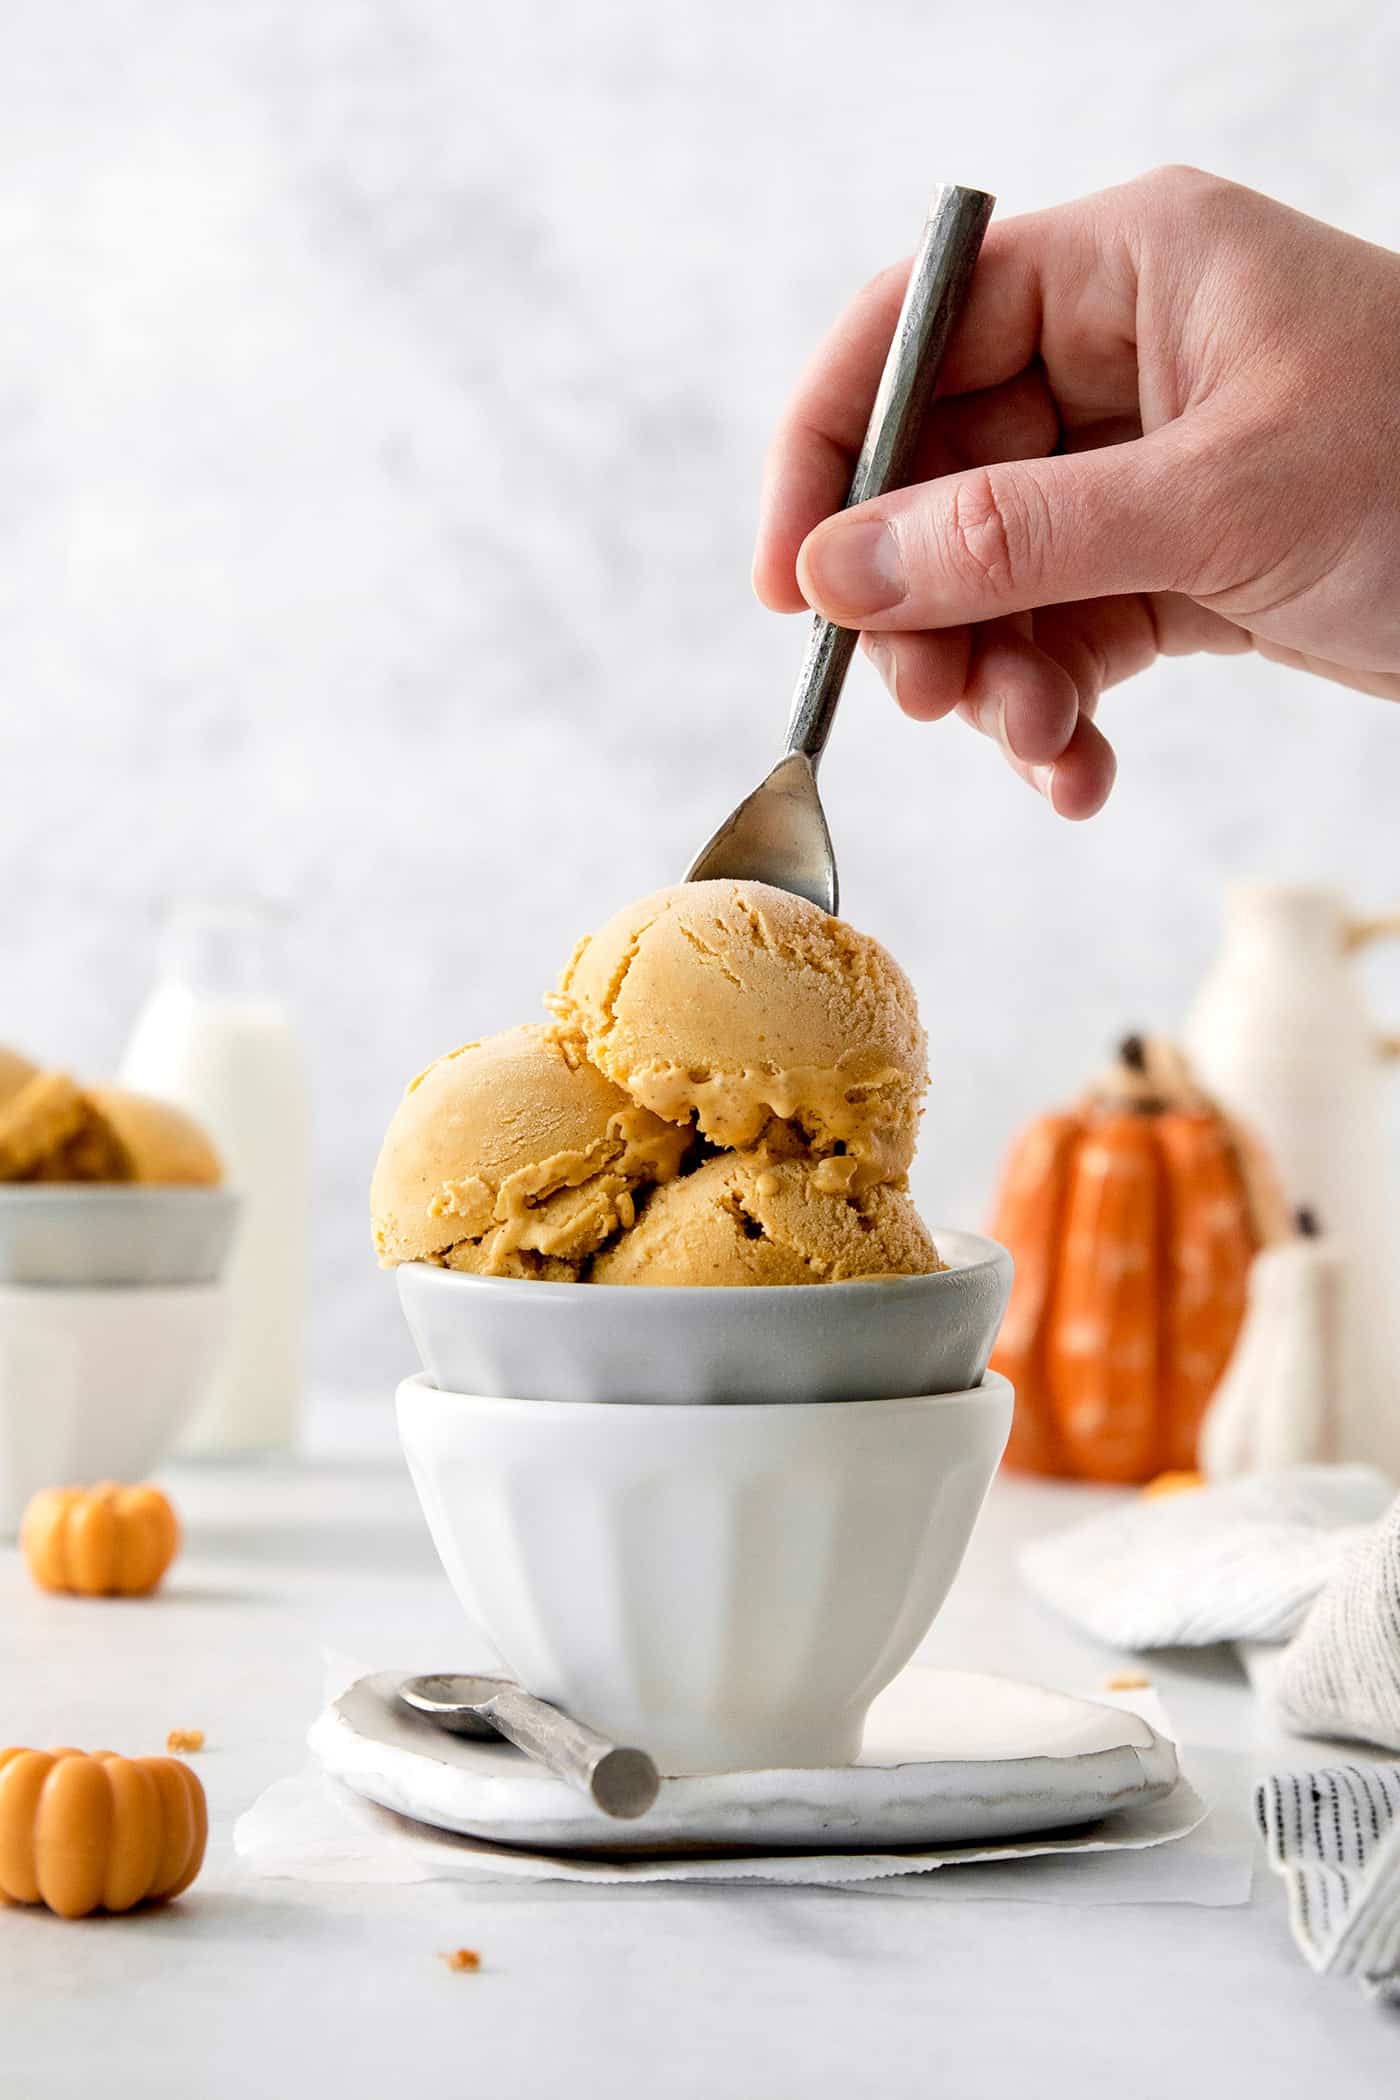 Scoops of orange pumpkin ice cream are shown in a white and gray bowl as a hand dips in a spoon.